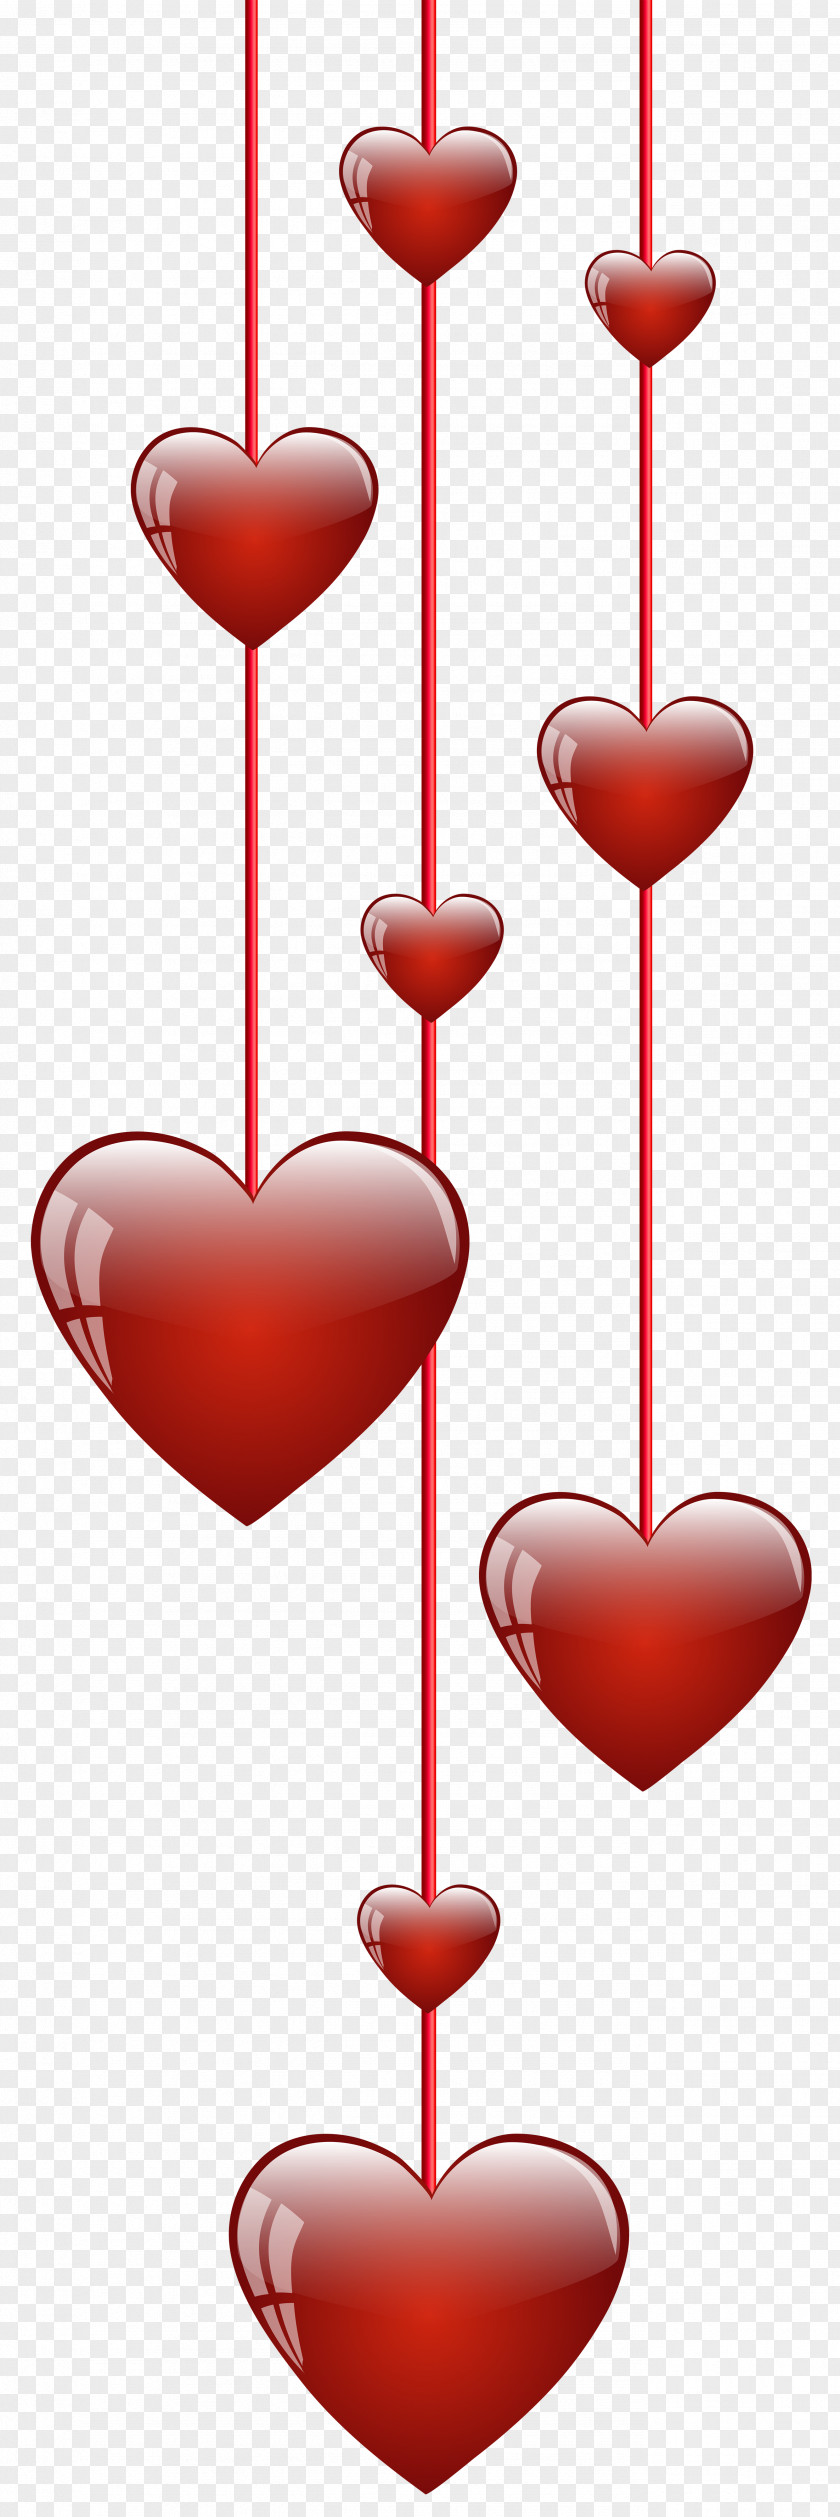 Hanging Hearts Clip Art Image Heart PNG